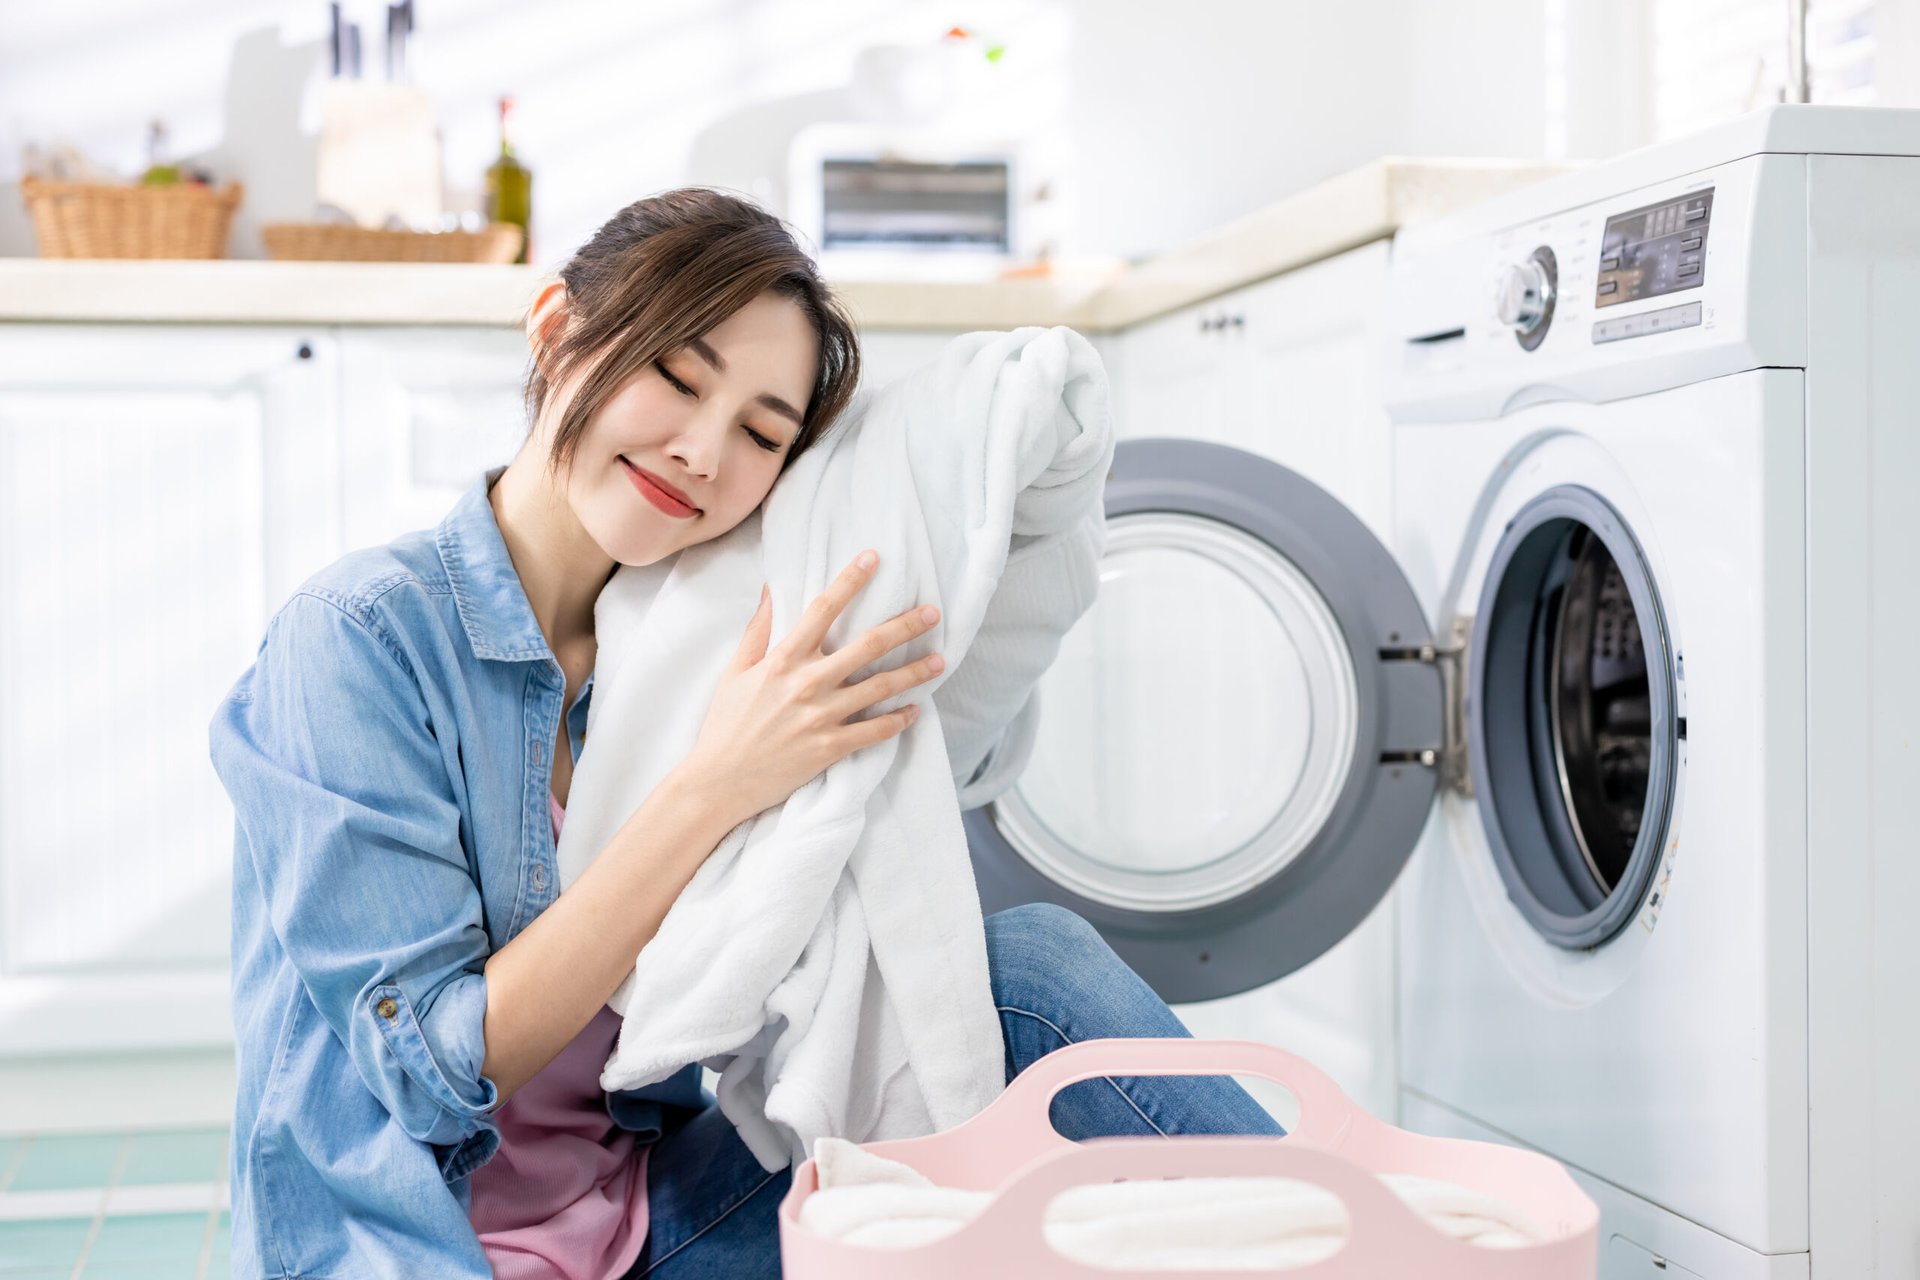 Woman in front of clothes dryer